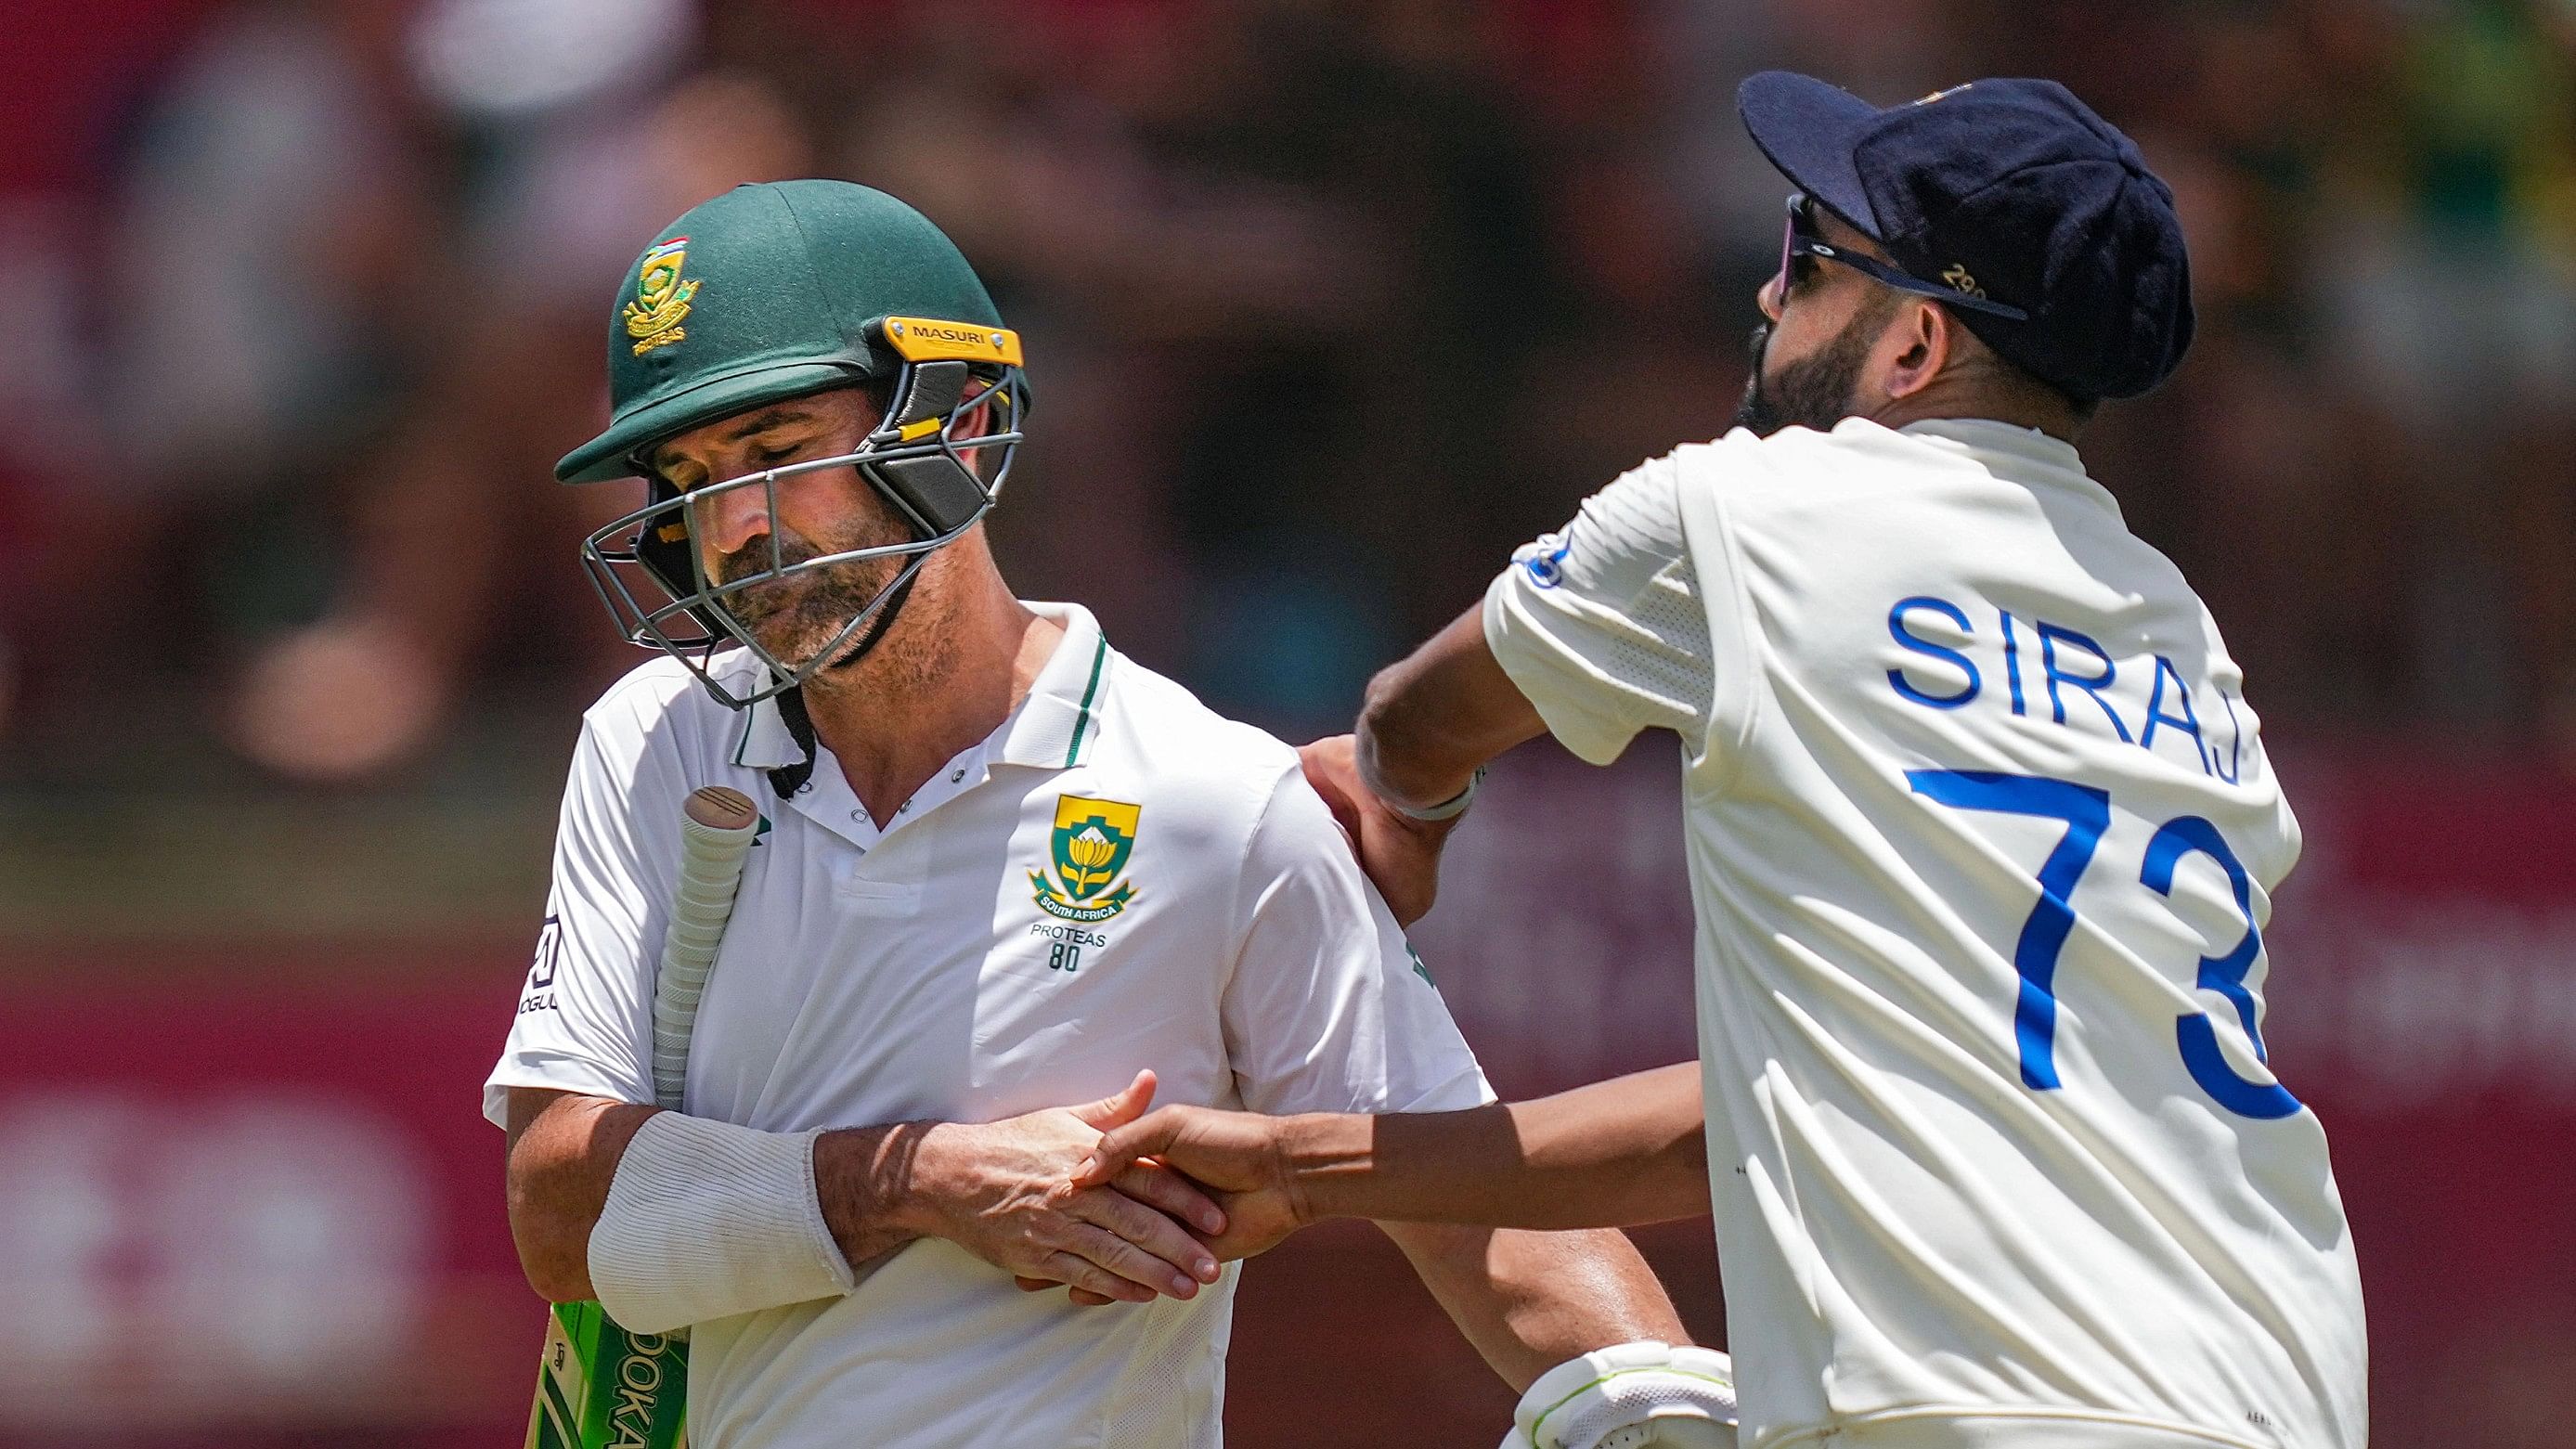 <div class="paragraphs"><p>South Africa's Dean Elgar being greeted by India's Mohammad Siraj for his innings as he leaves the ground on the third day of the first Test cricket match between India and South Africa, at SuperSport Park Stadium, in Centurion.</p></div>